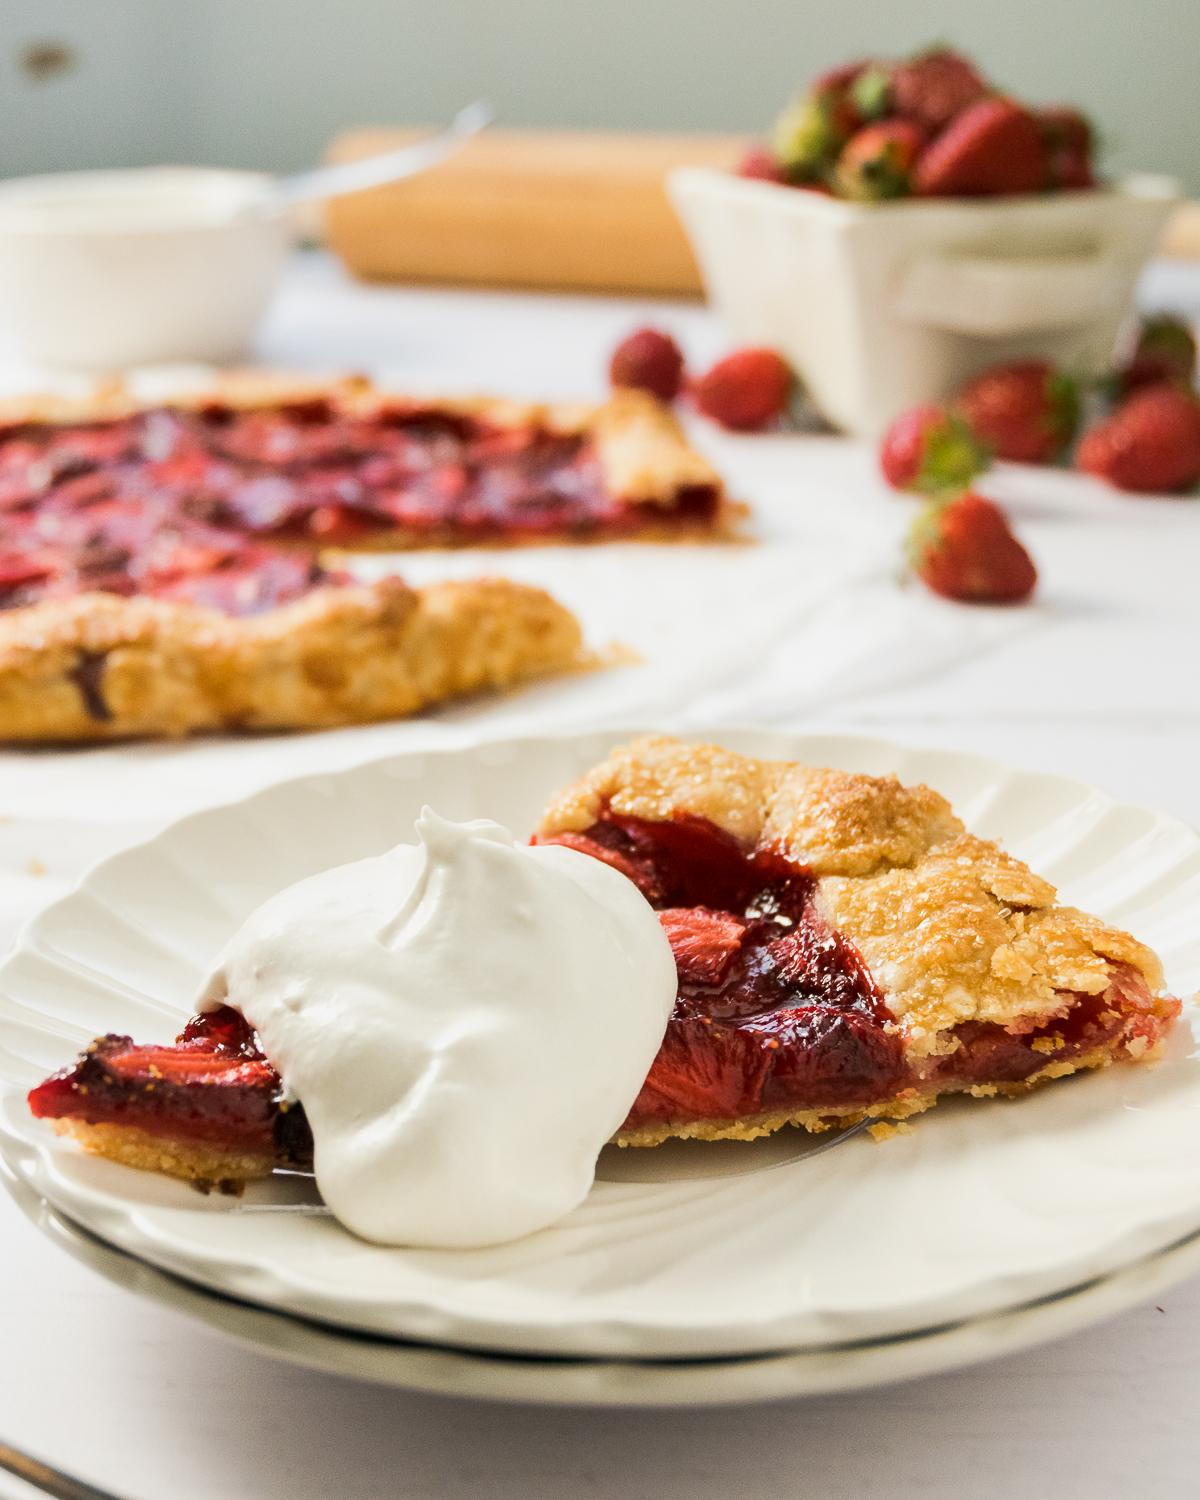 A slice of strawberry galette on a plate topped with whipped cream.